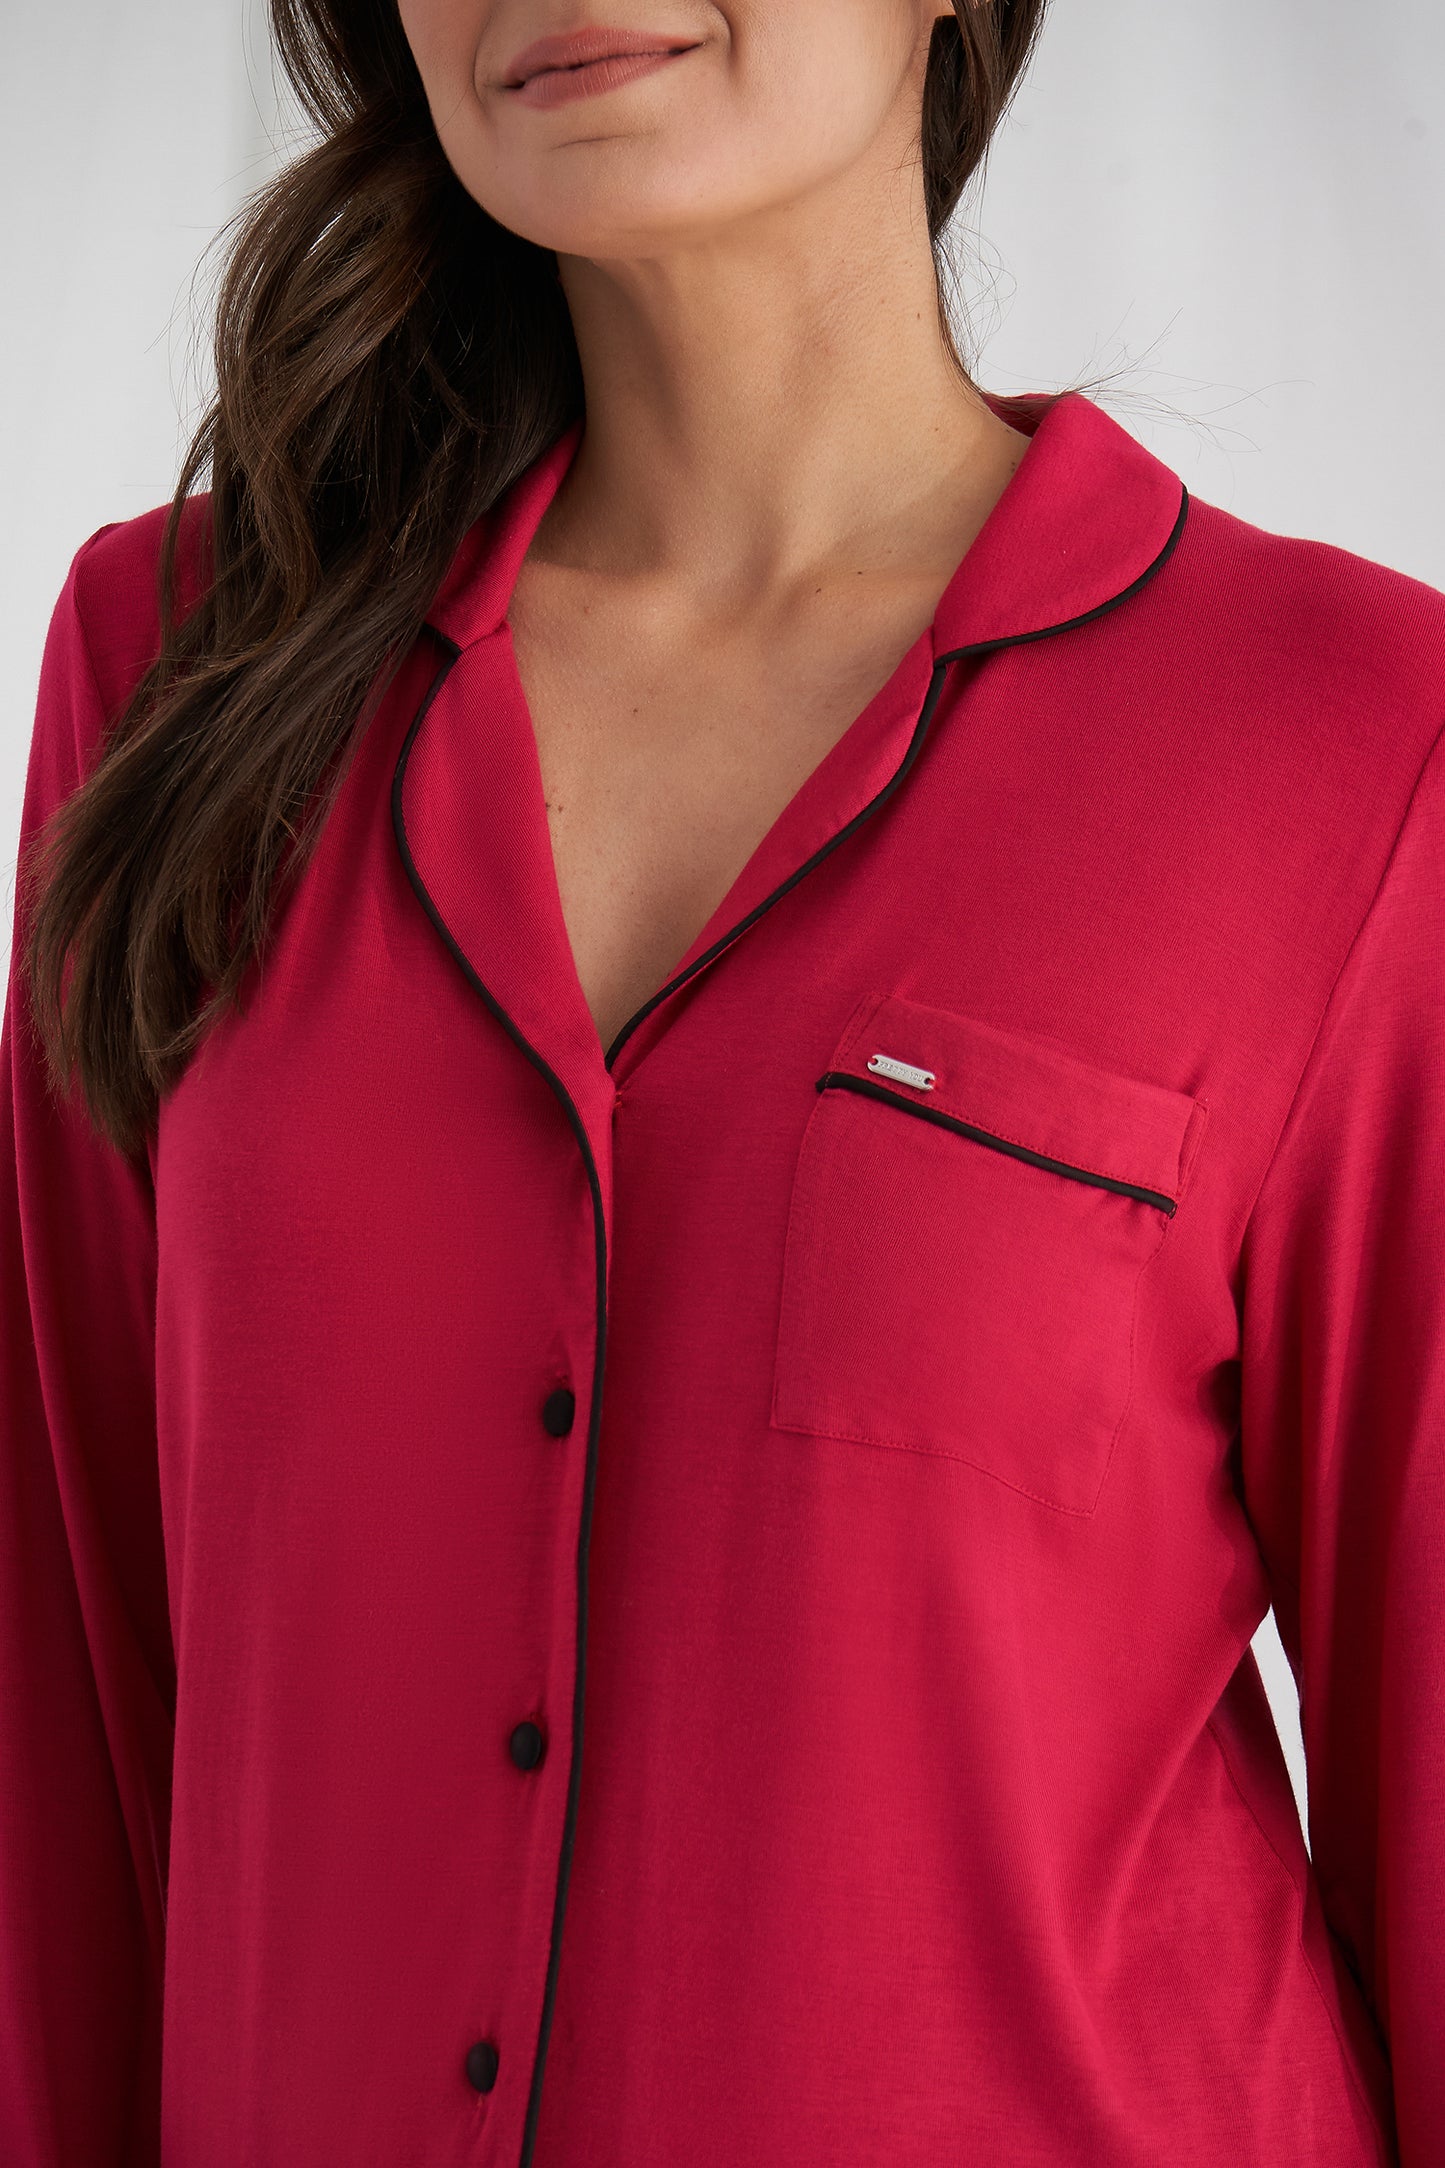 Women's Bamboo Long Pyjama Set in Scarlet Red with revere collar and contrast colour piping from Pretty You London